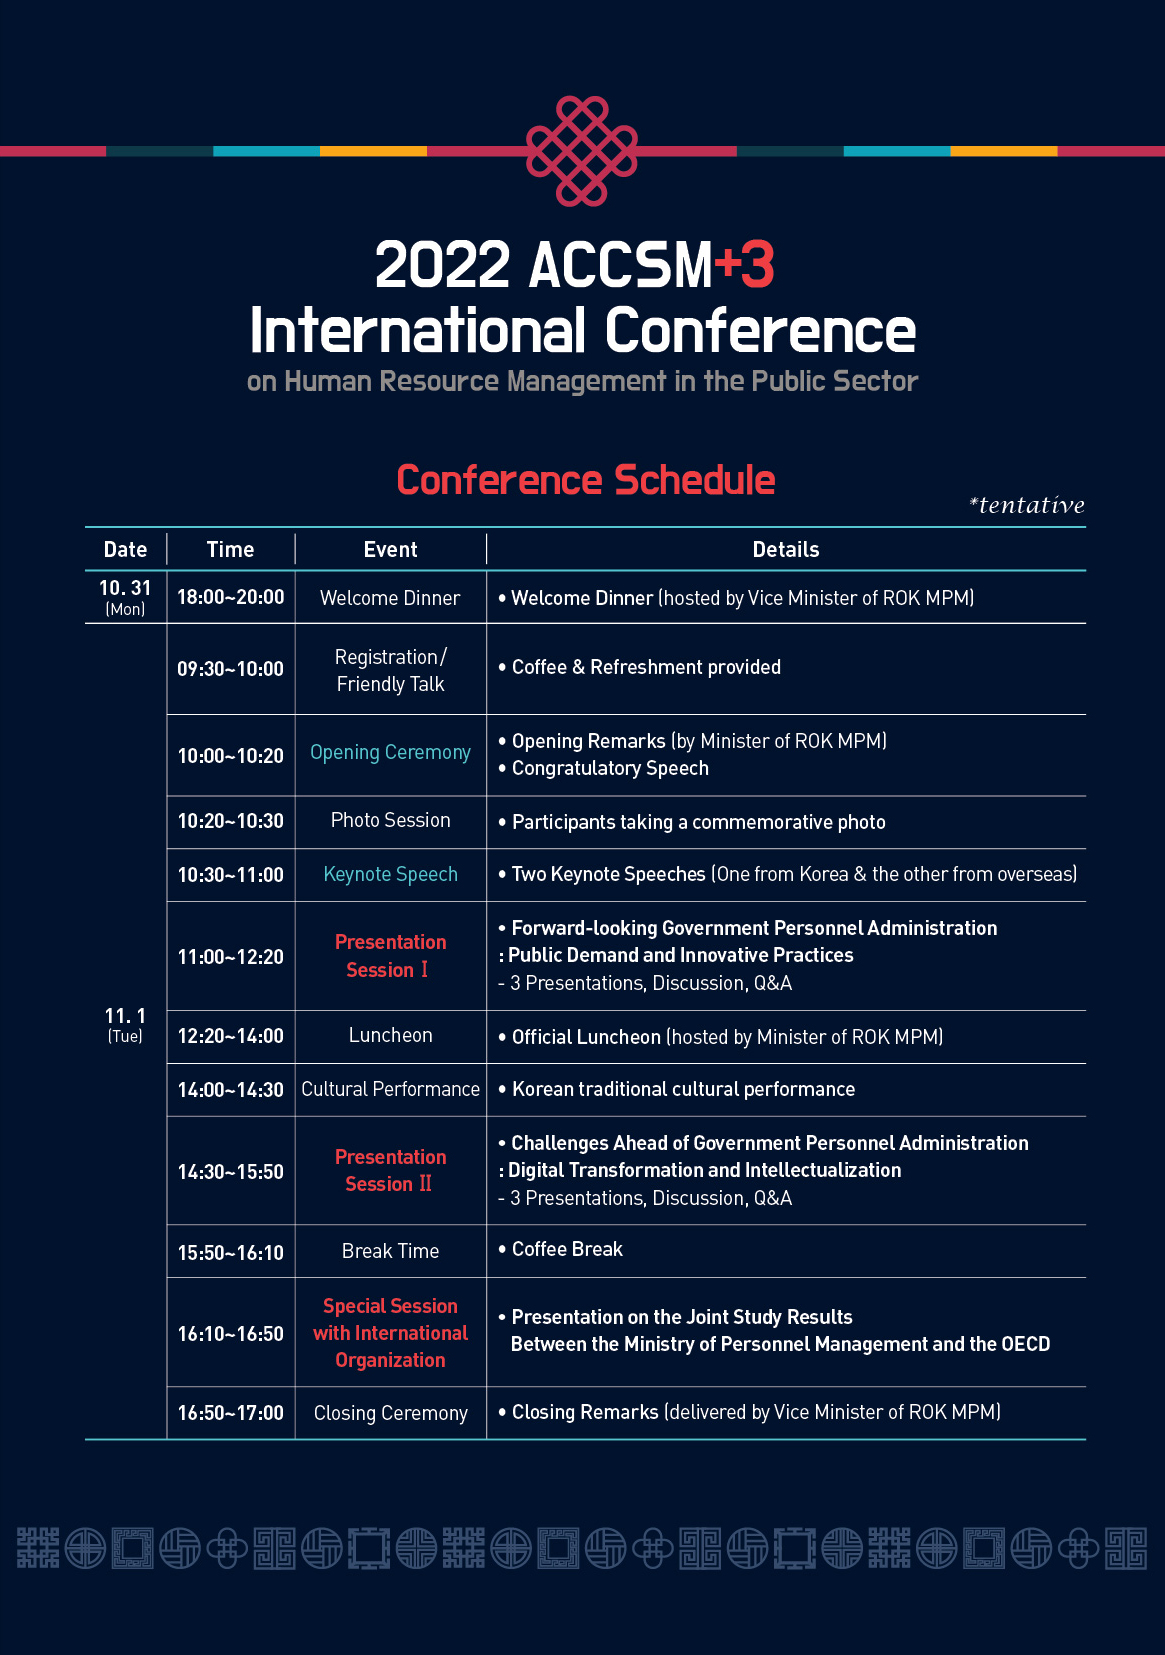 2022 ACCSM+3 International Conference, Conference Schedule